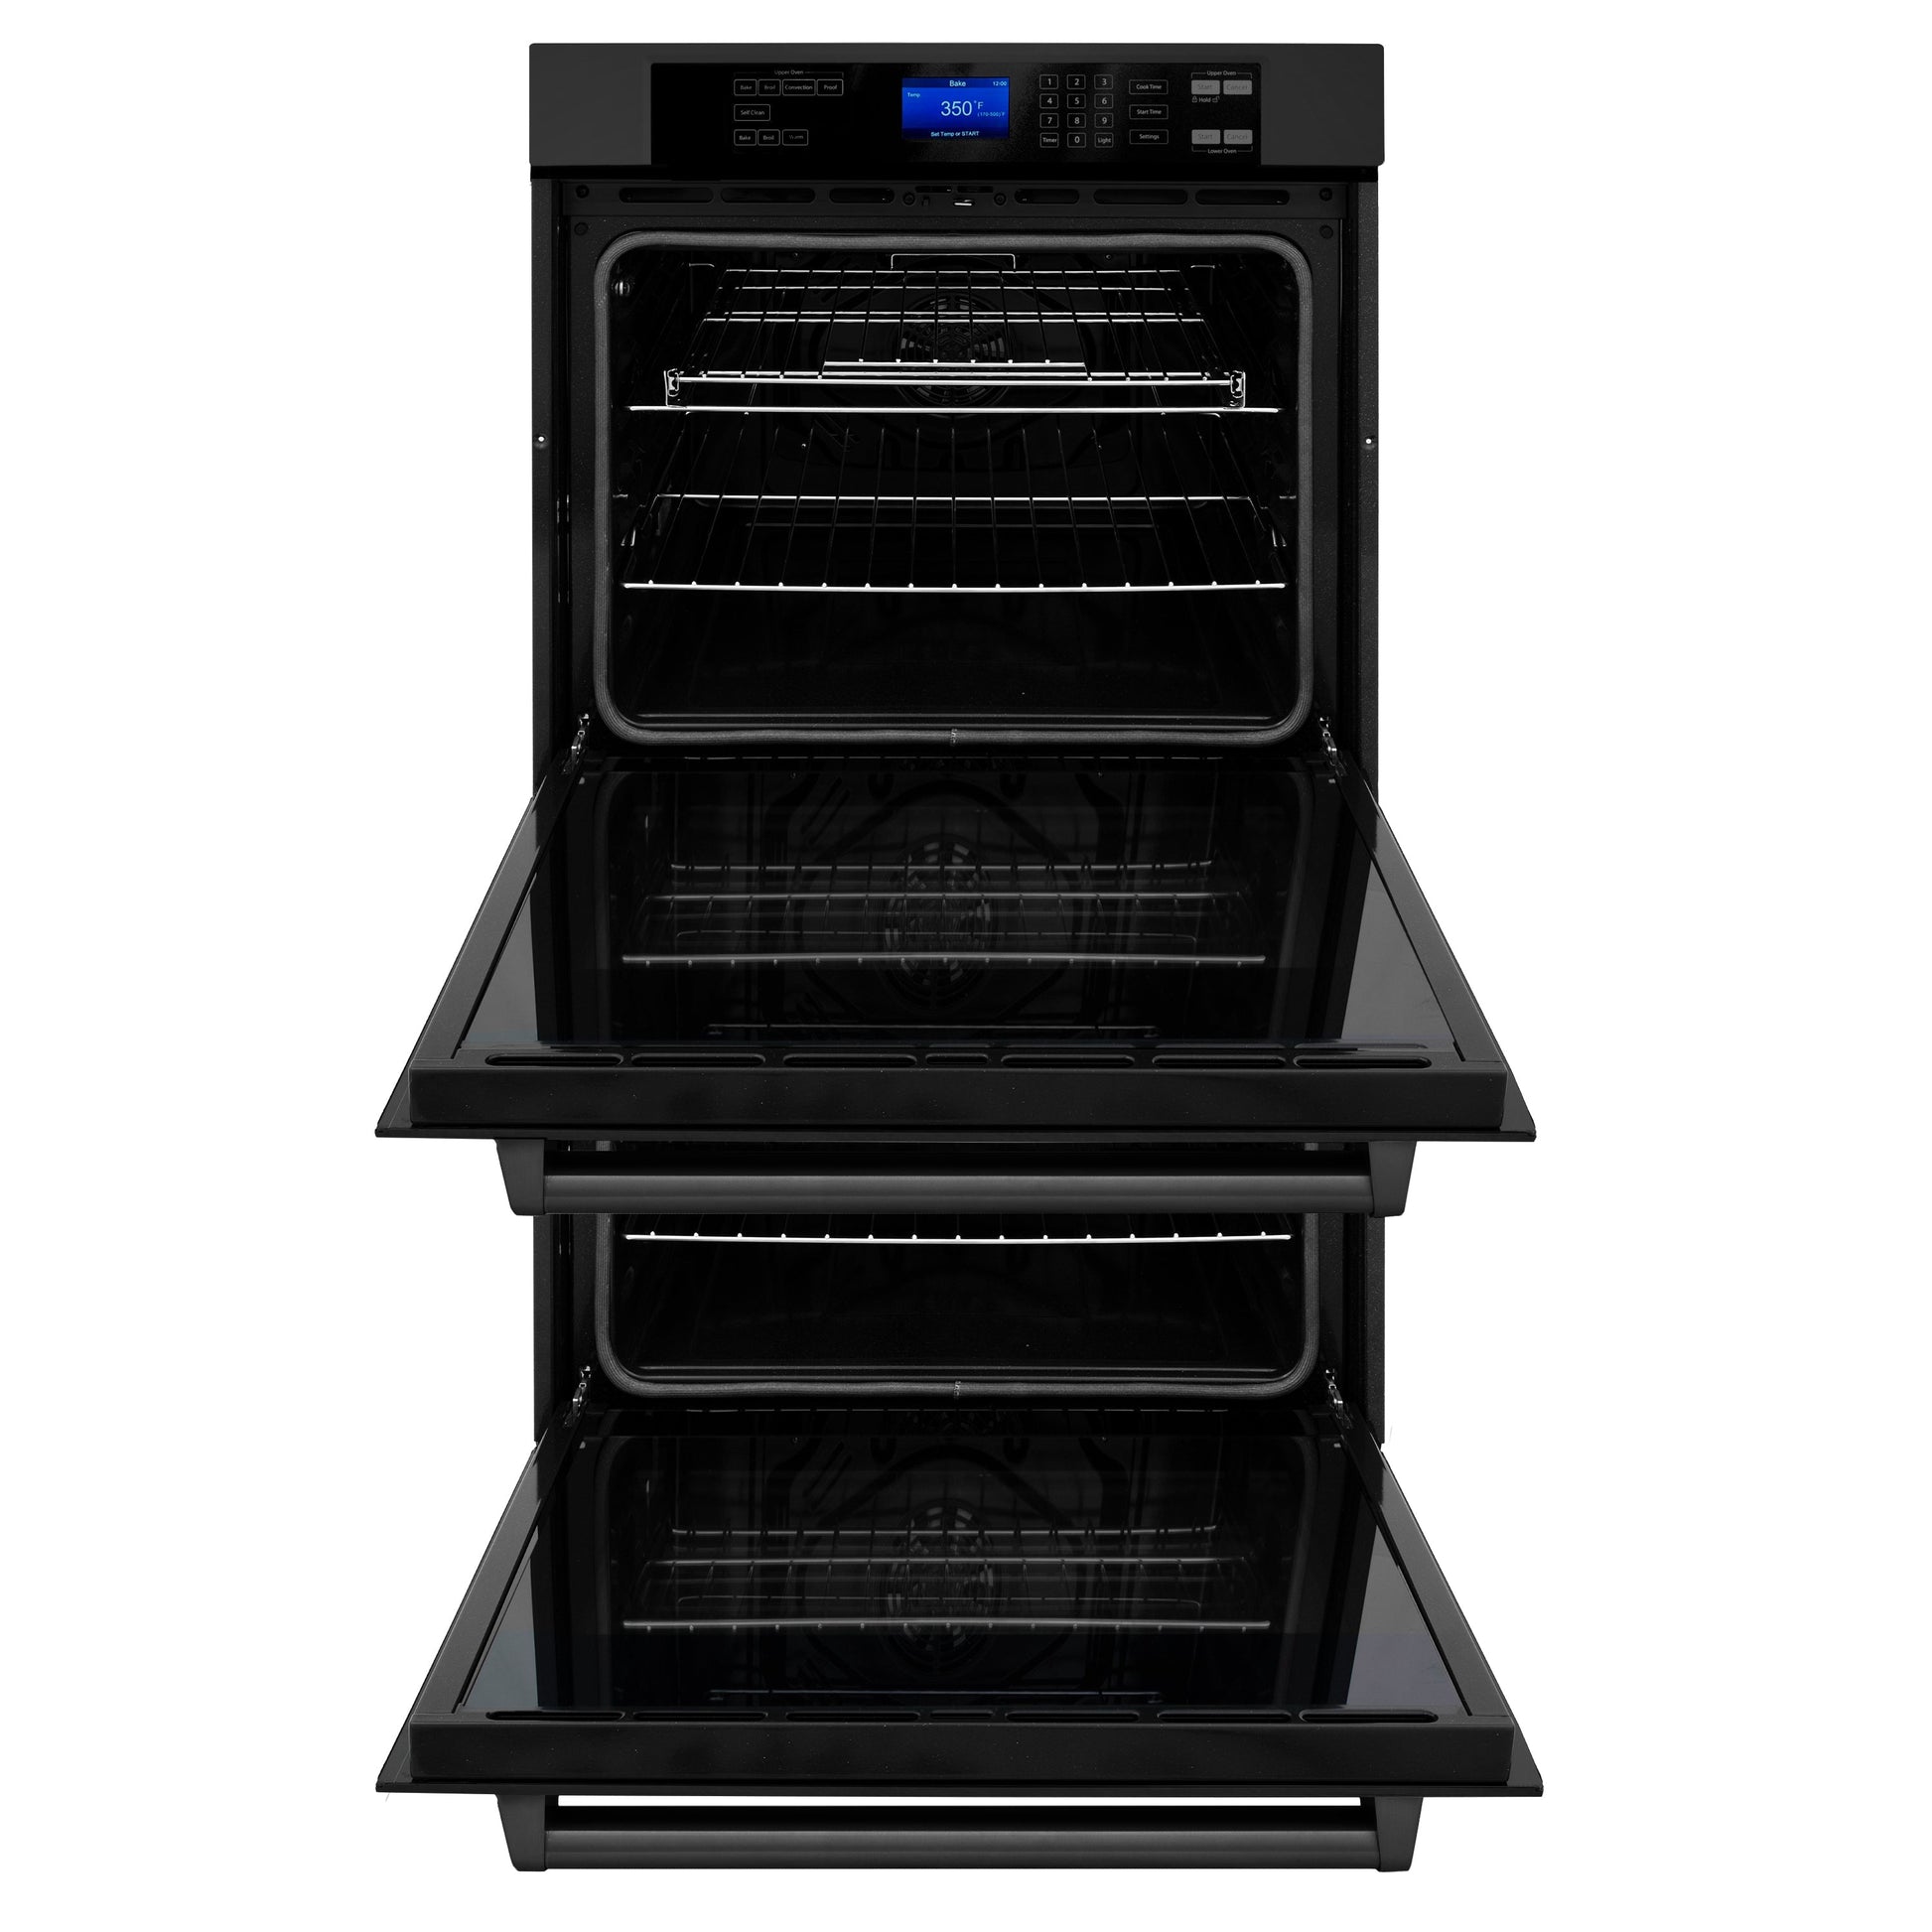 ZLINE 30" Professional Electric Double Wall Oven - Self Clean and True Convection - Stainless Steel